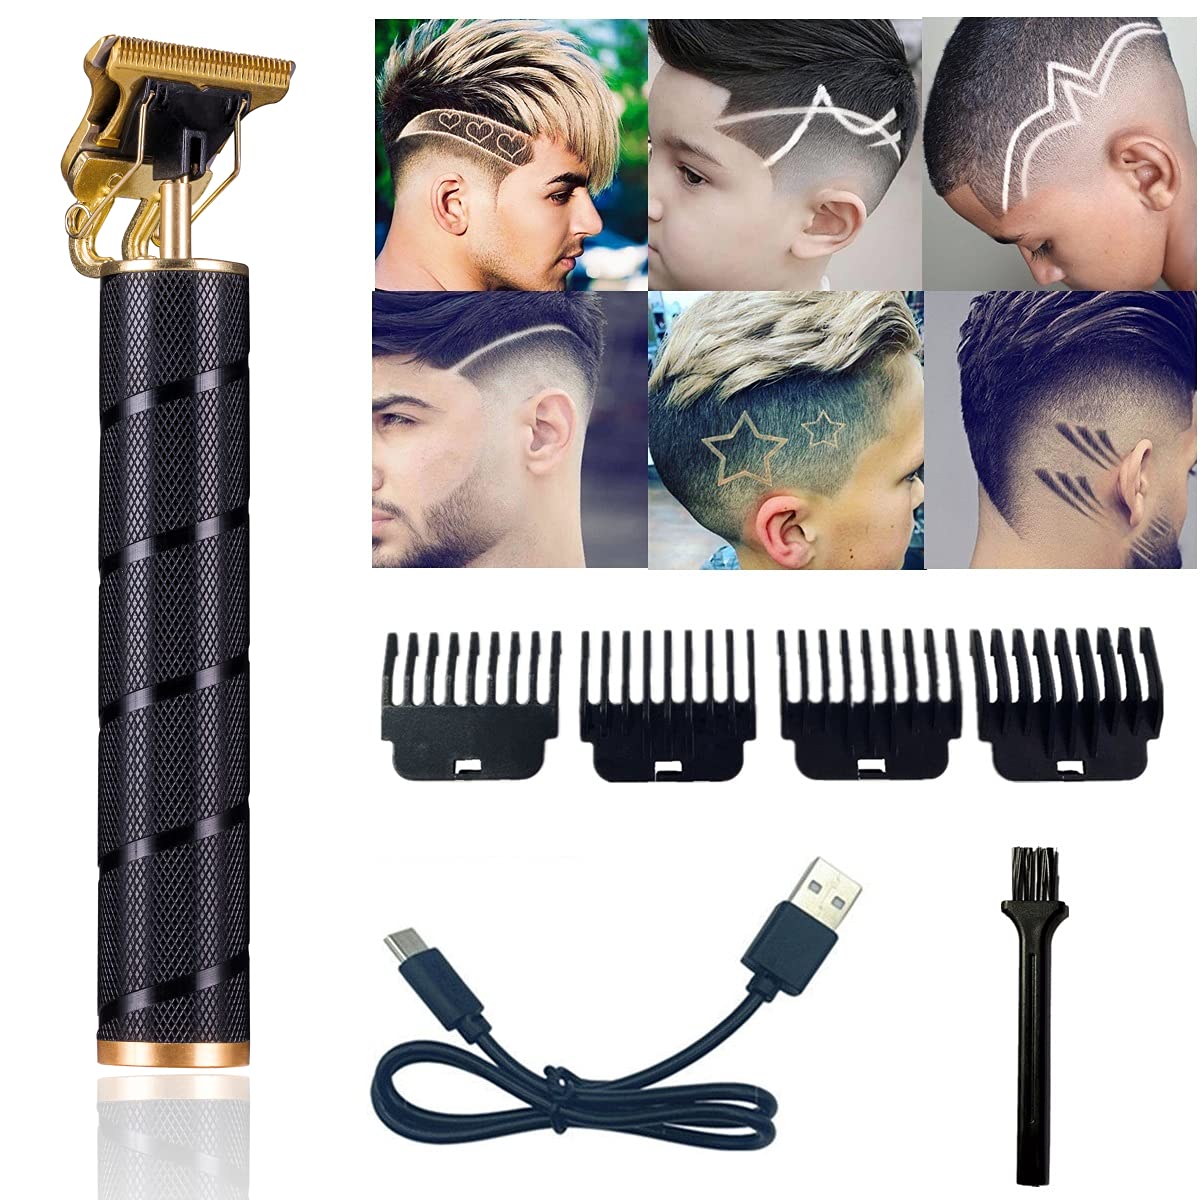 Pro T Outline Clippers Trimmer, Electric Pro Li Outline Trimmer T Blade Trimmer Grooming Cordless Rechargeable,Professional 0mm Baldheaded Zero Gapped Trimmer Hair Clipper for Men - Home Decor Gifts and More